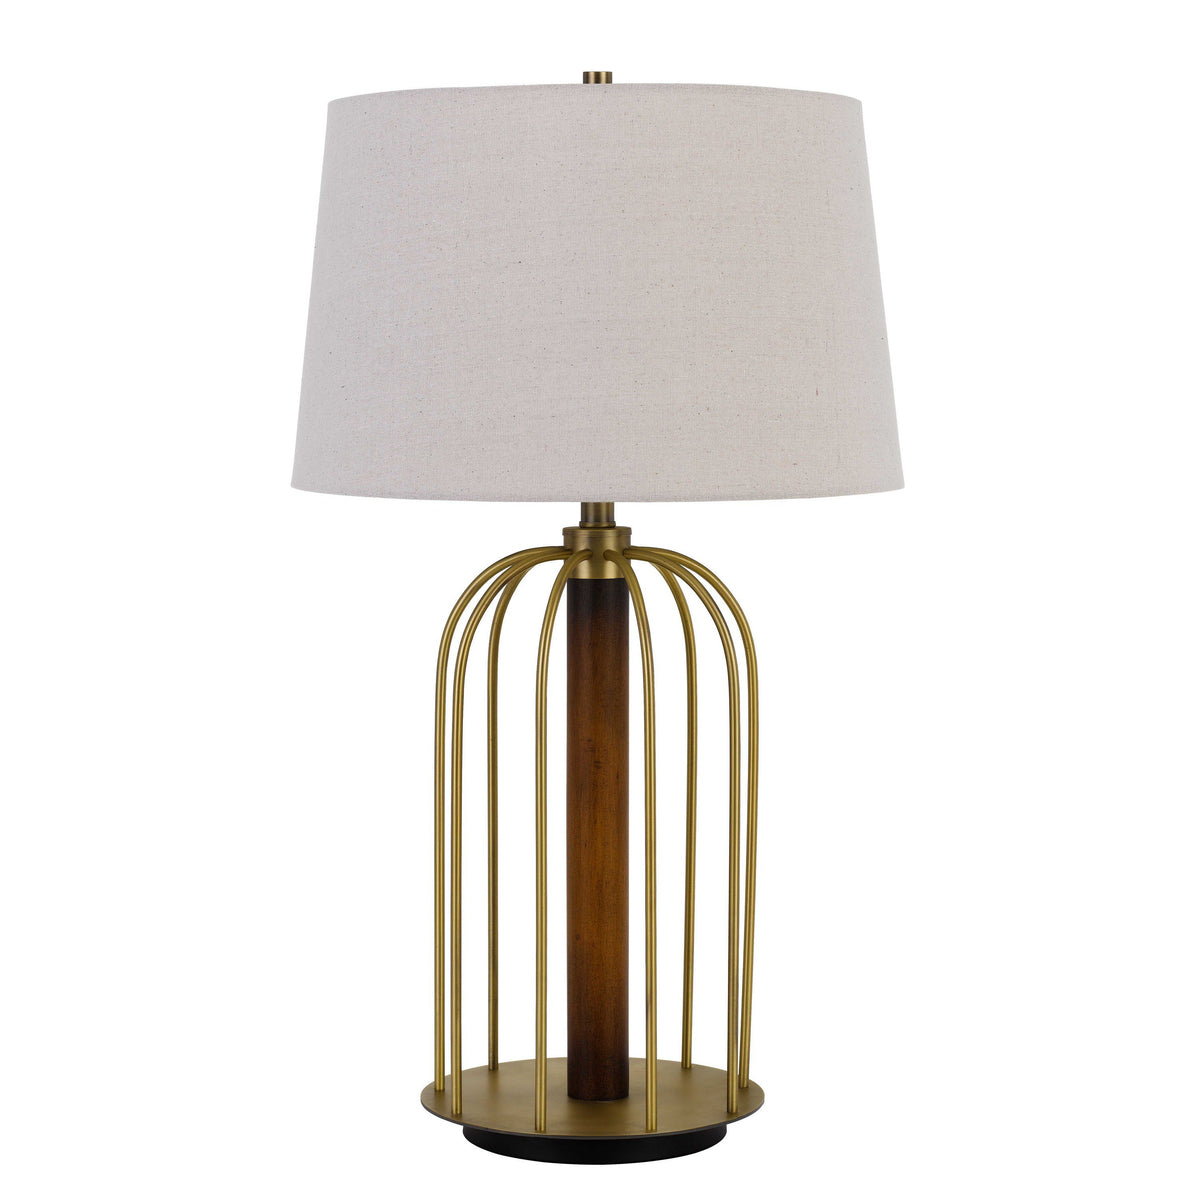 Metal Table Lamp with Cage Design Support with Round Base, White and Brass - BM224830